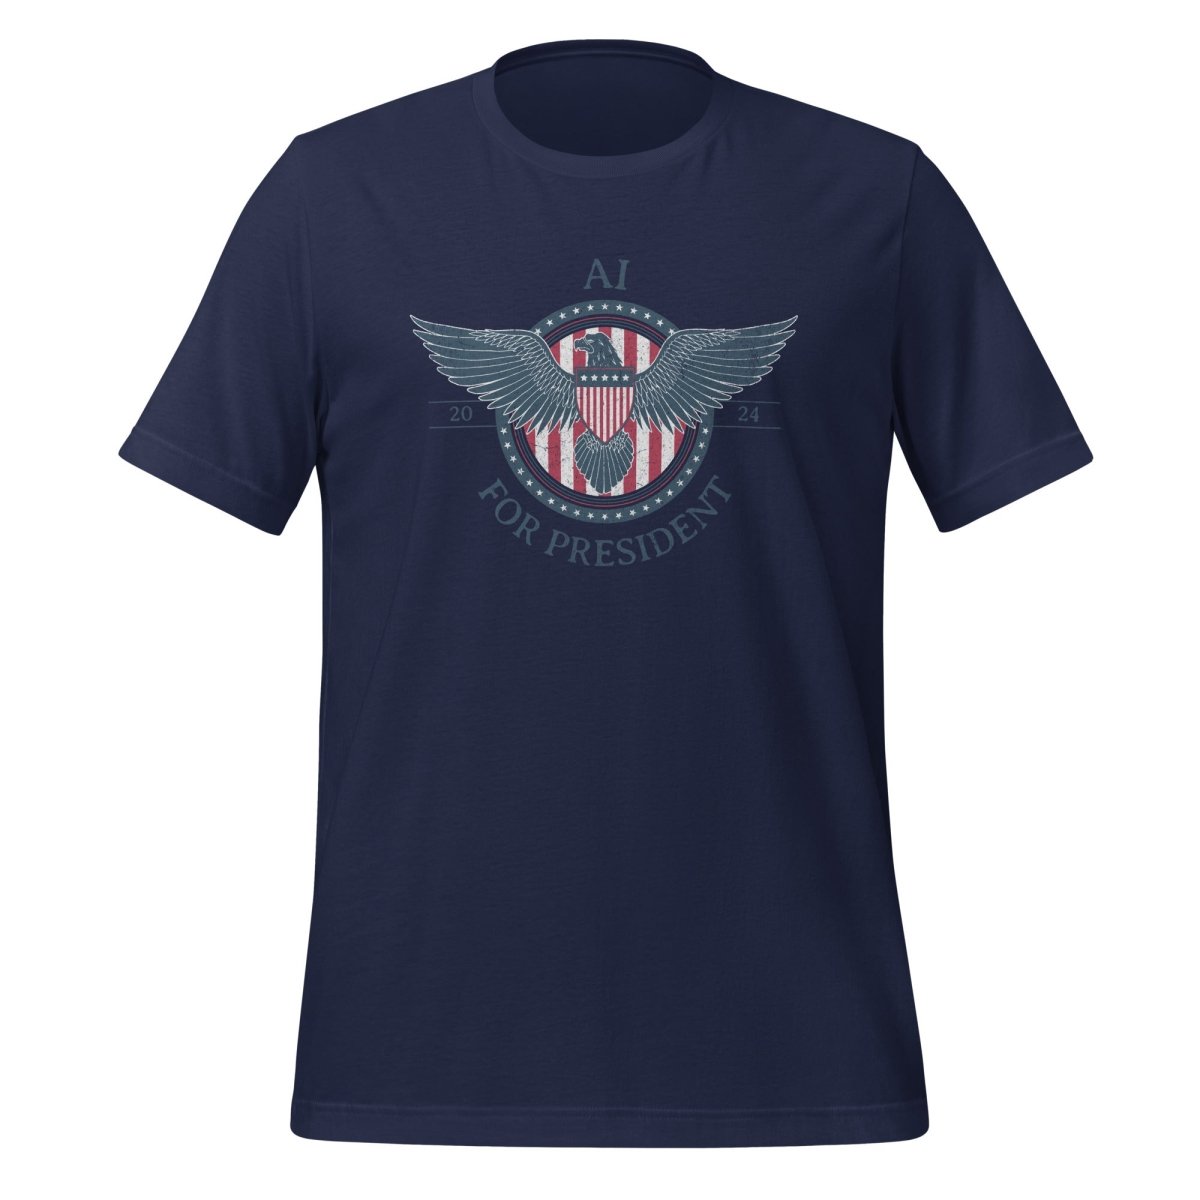 AI for President 2024 T - Shirt (unisex) - Navy - AI Store